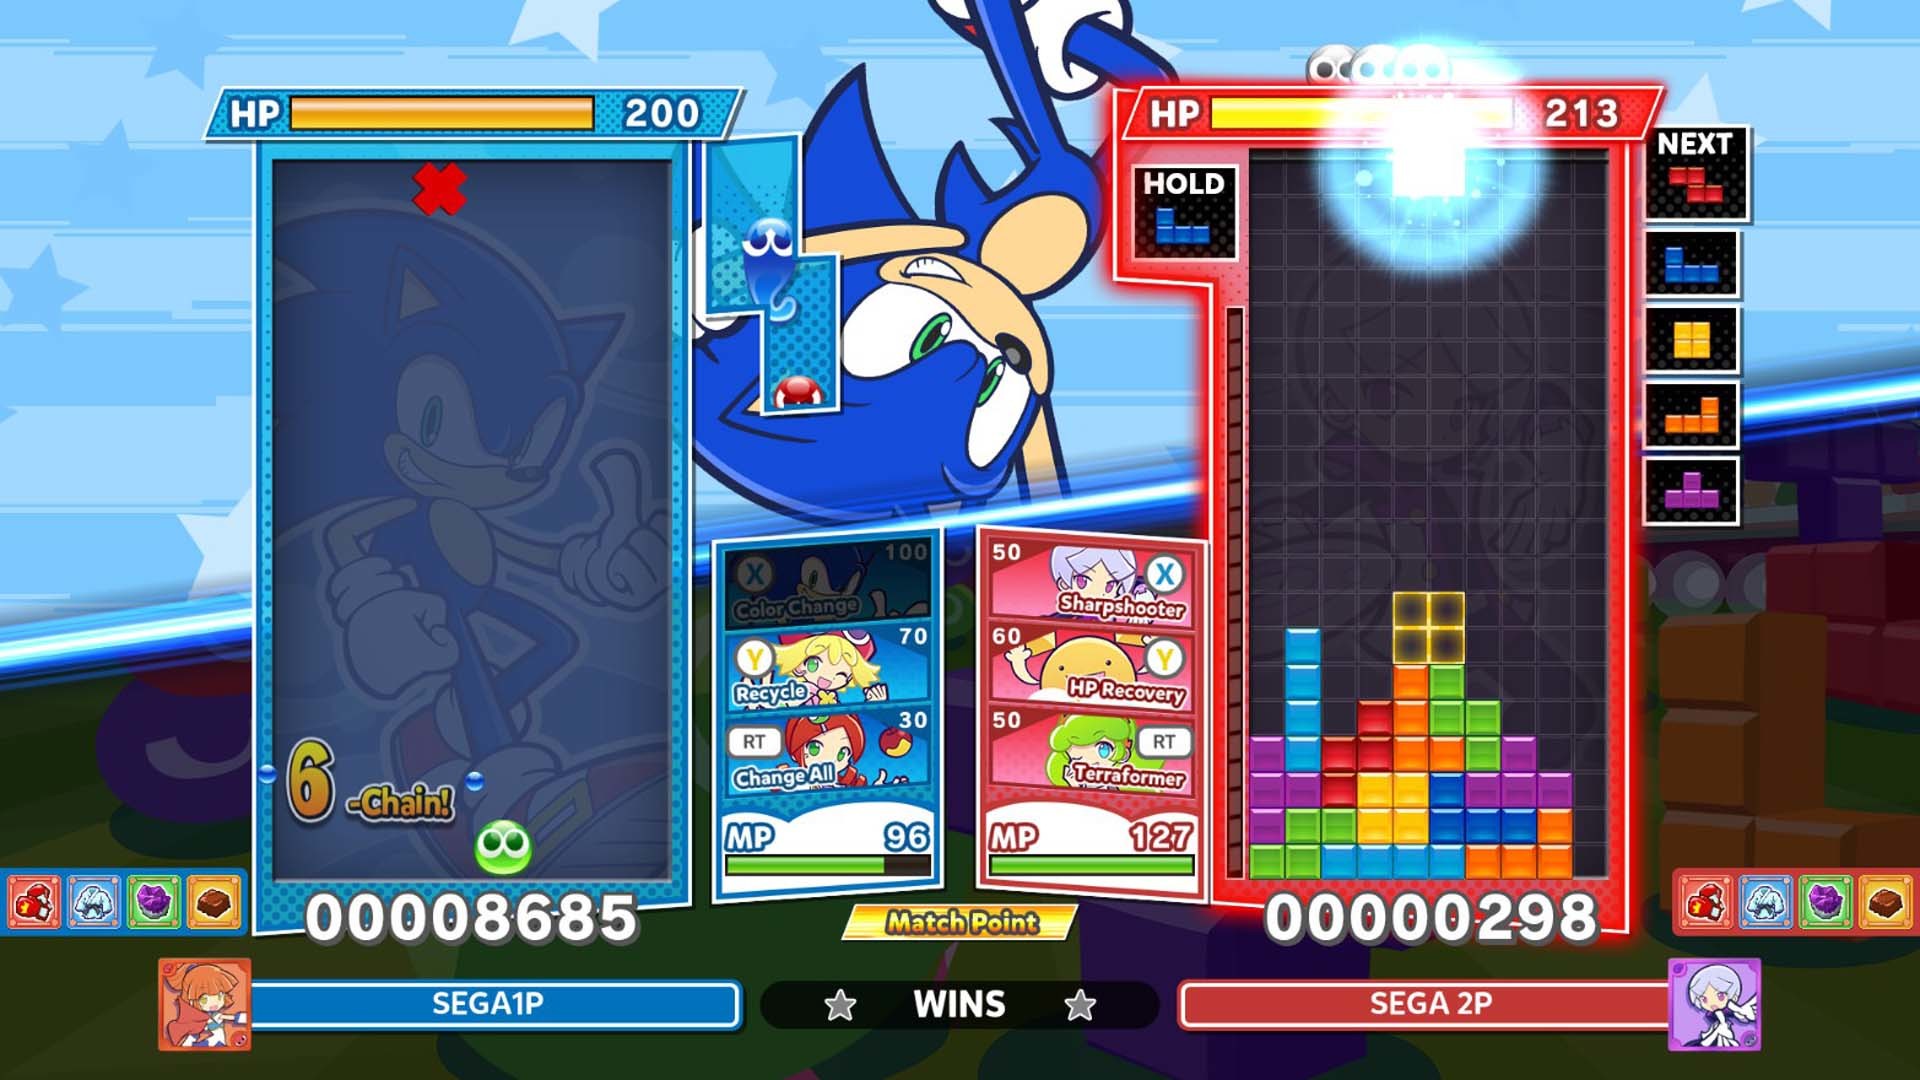 Find the best laptops for Puyo Puyo Tetris 2